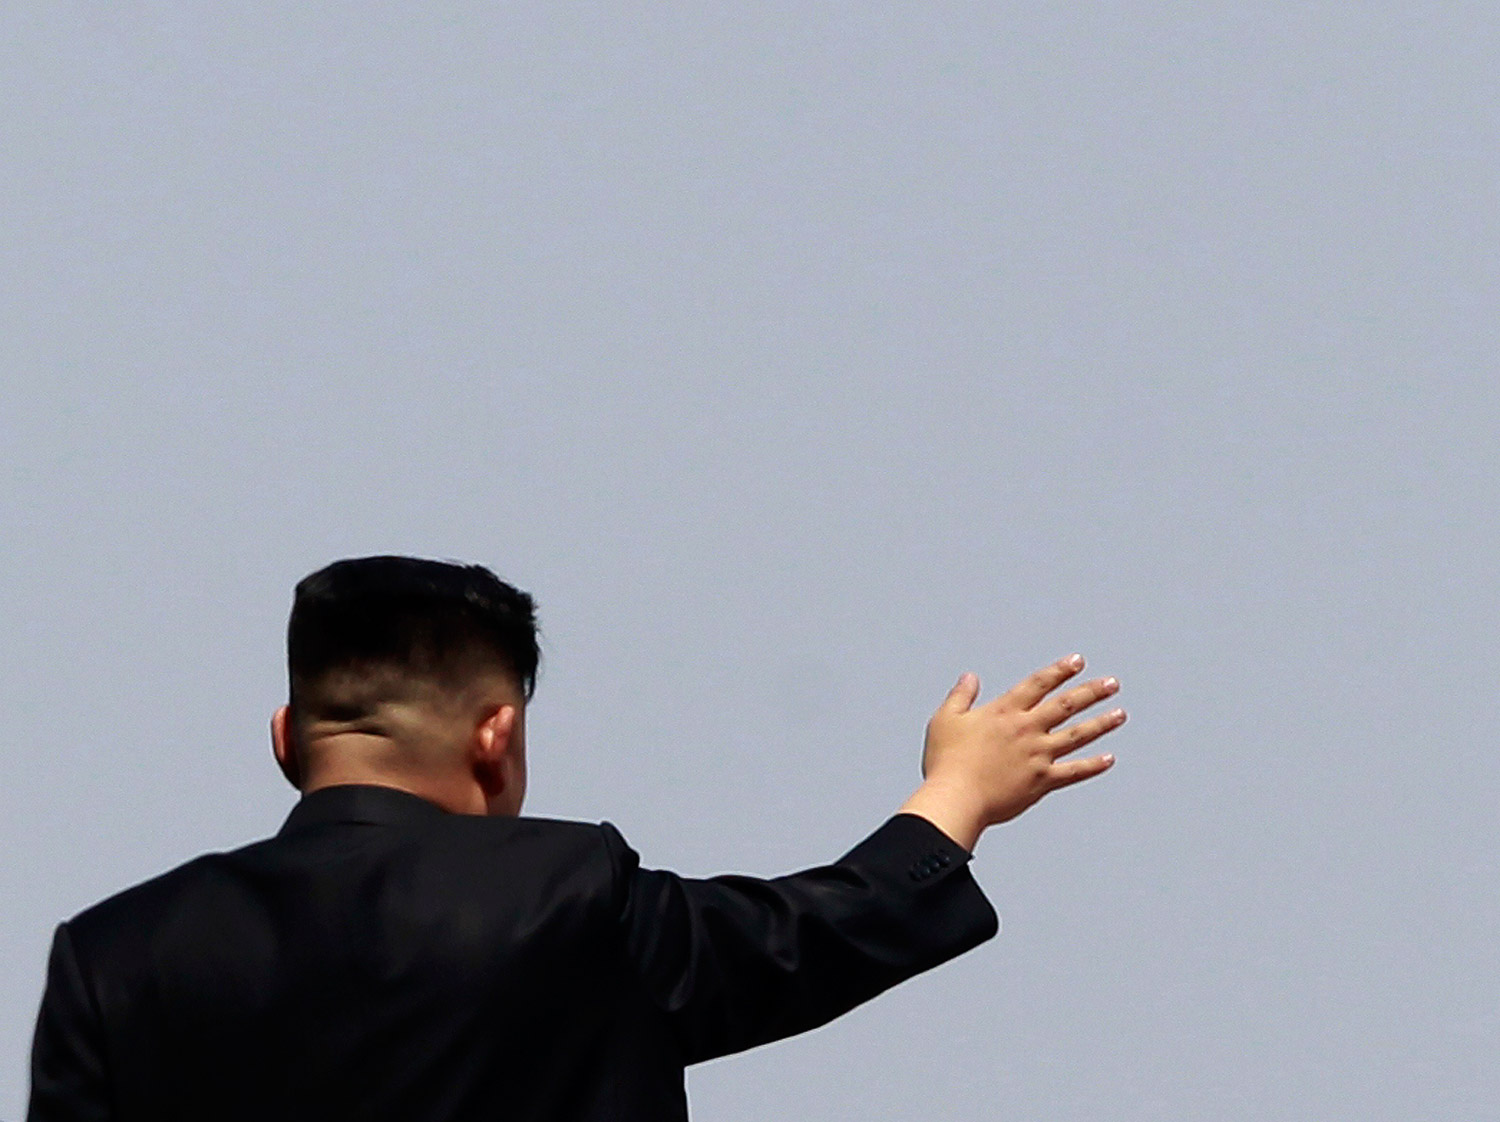 North Korea leader Kim Jong-un waves to the crowd during a military parade to celebrate the centenary of the birth of North Korea founder Kim Il-sung in Pyongyang